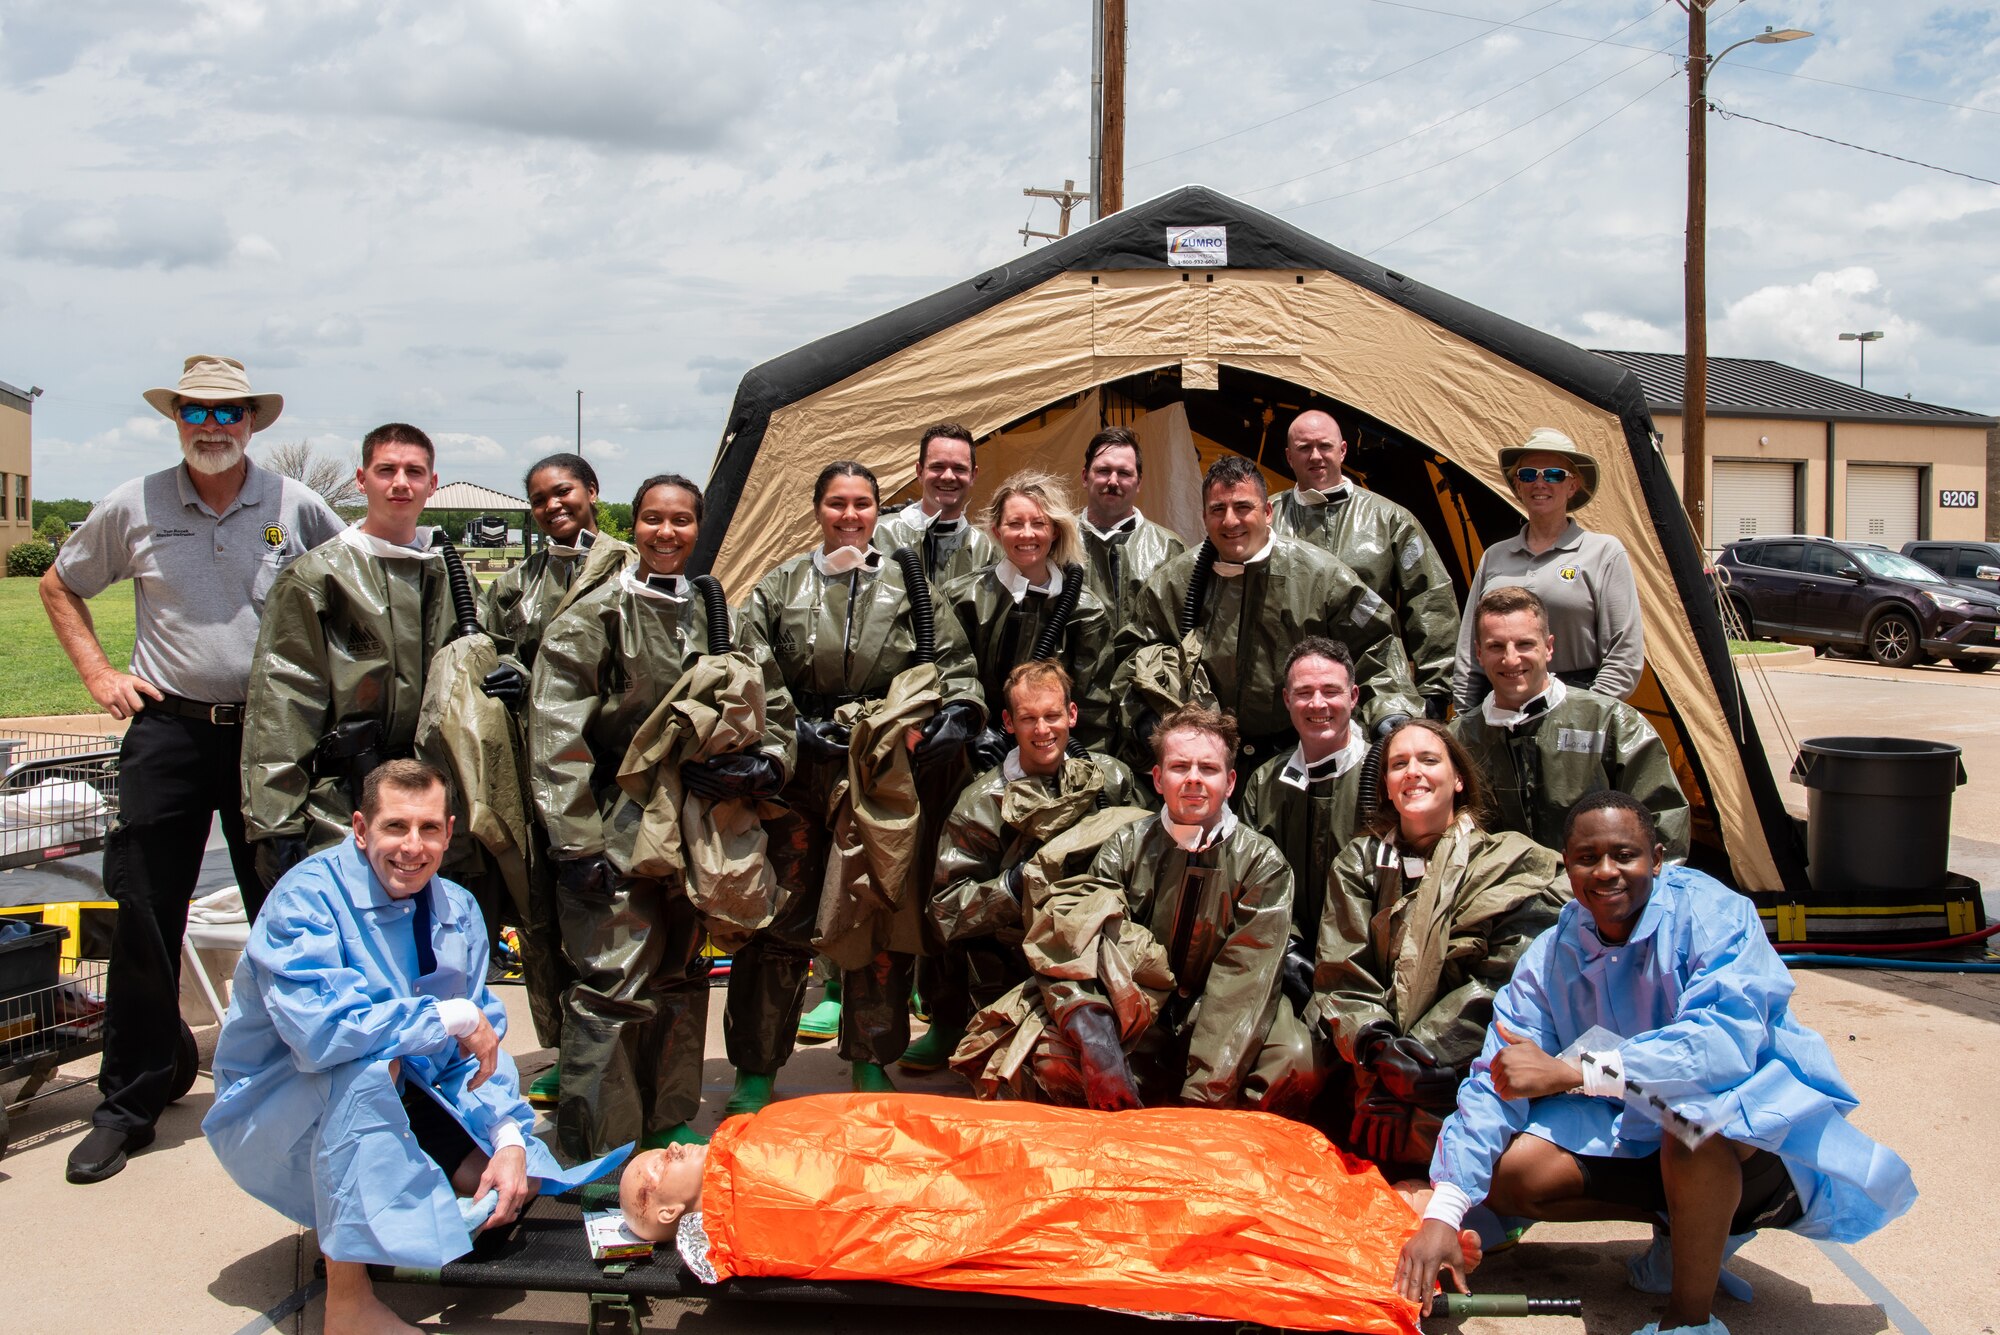 Airmen assigned to the 7th Medical Group pose after finishing their decontamination procedures exercise at Dyess Air Force Base, Texas, June 1, 2023. The exercise required the completion of a three-day training course that tested Airmen’s medical disaster response. (U.S. Air Force photo by Airman 1st Class Alondra Cristobal Hernandez)